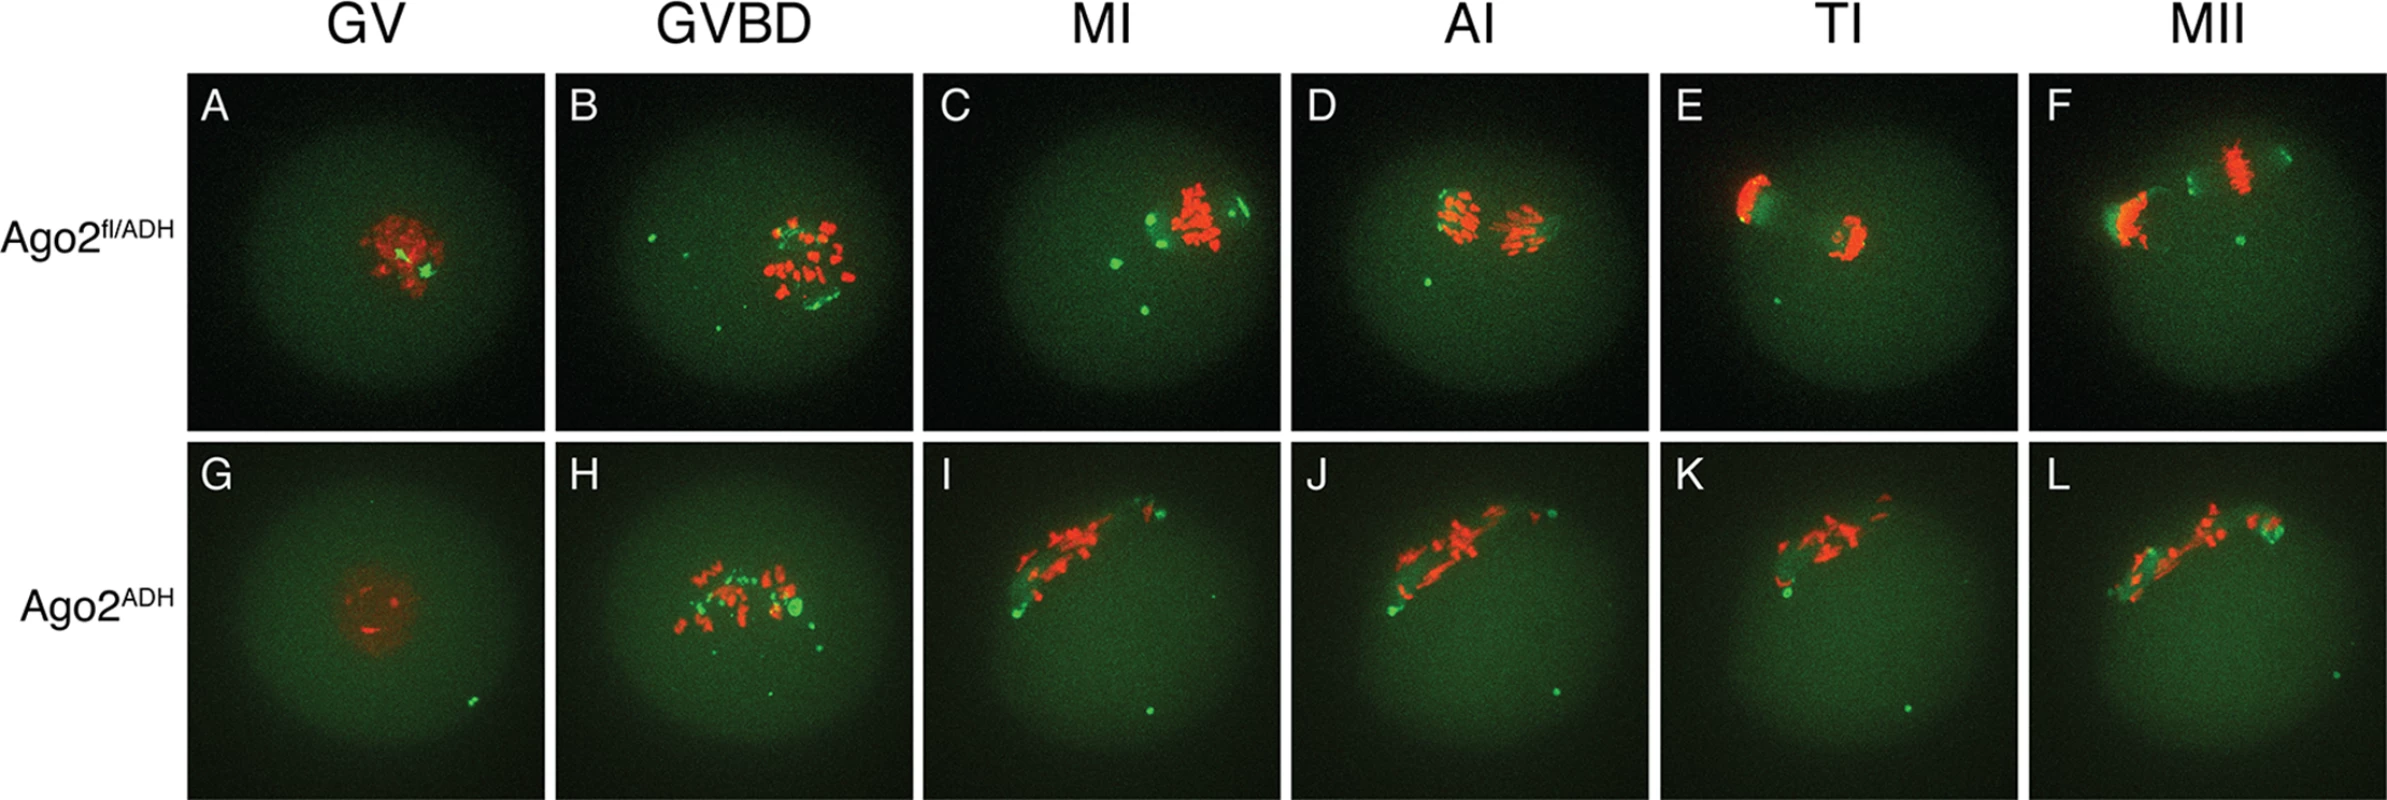 Abnormal chromosome segregation and spindle assembly in <i>Ago2</i><sup>ADH</sup> oocytes.